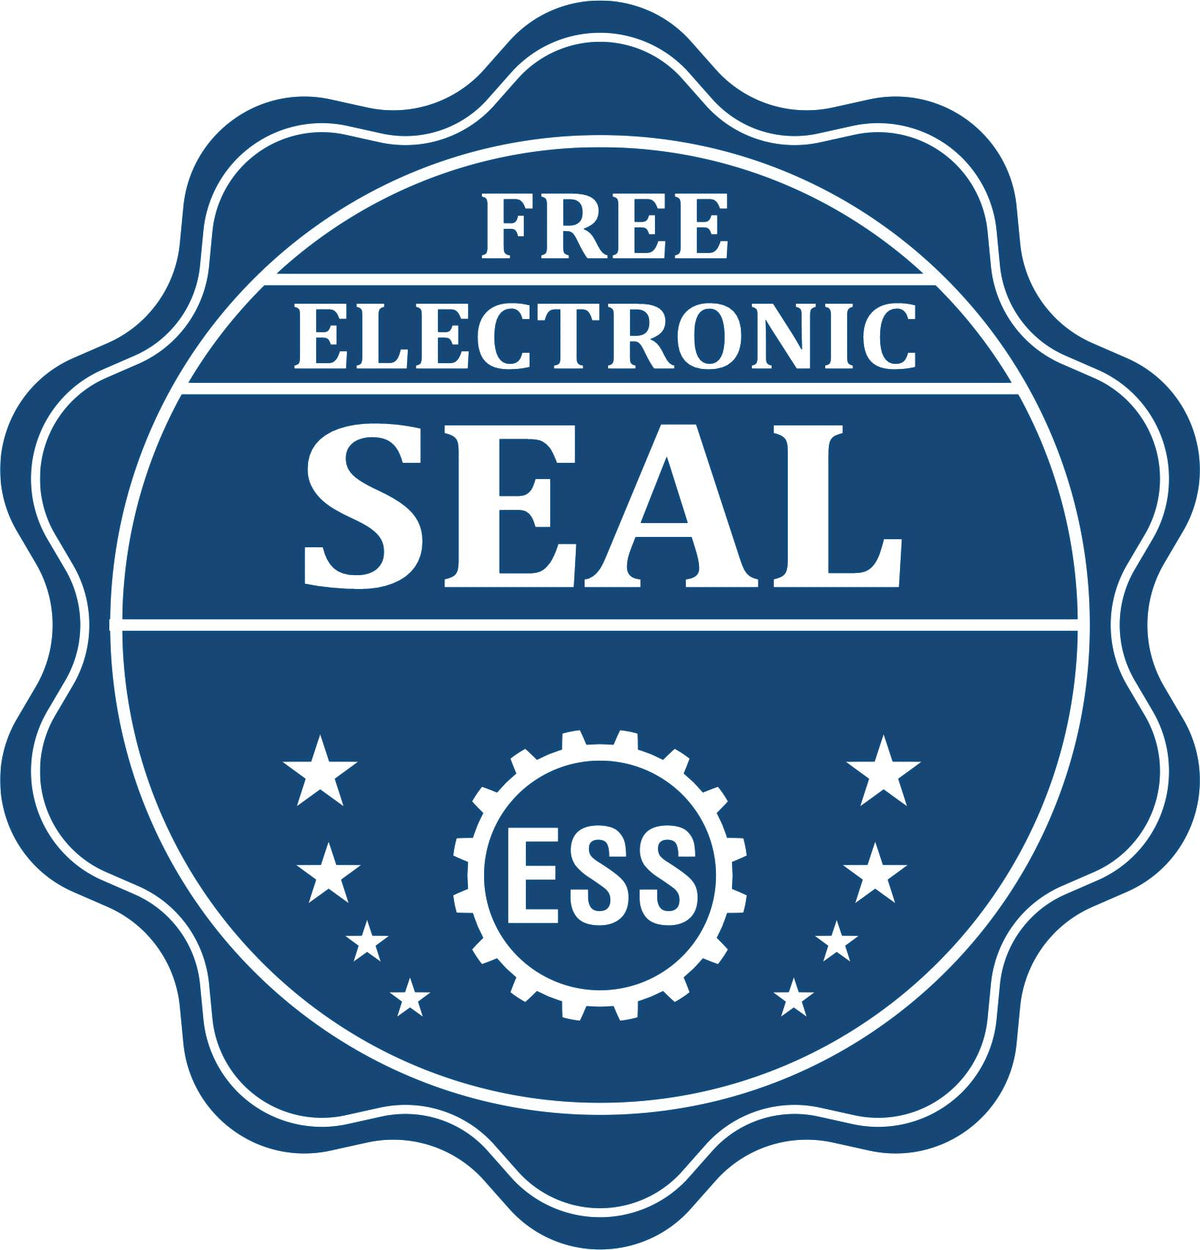 A badge showing a free electronic seal for the Gift Kansas Engineer Seal with stars and the ESS gear on the emblem.